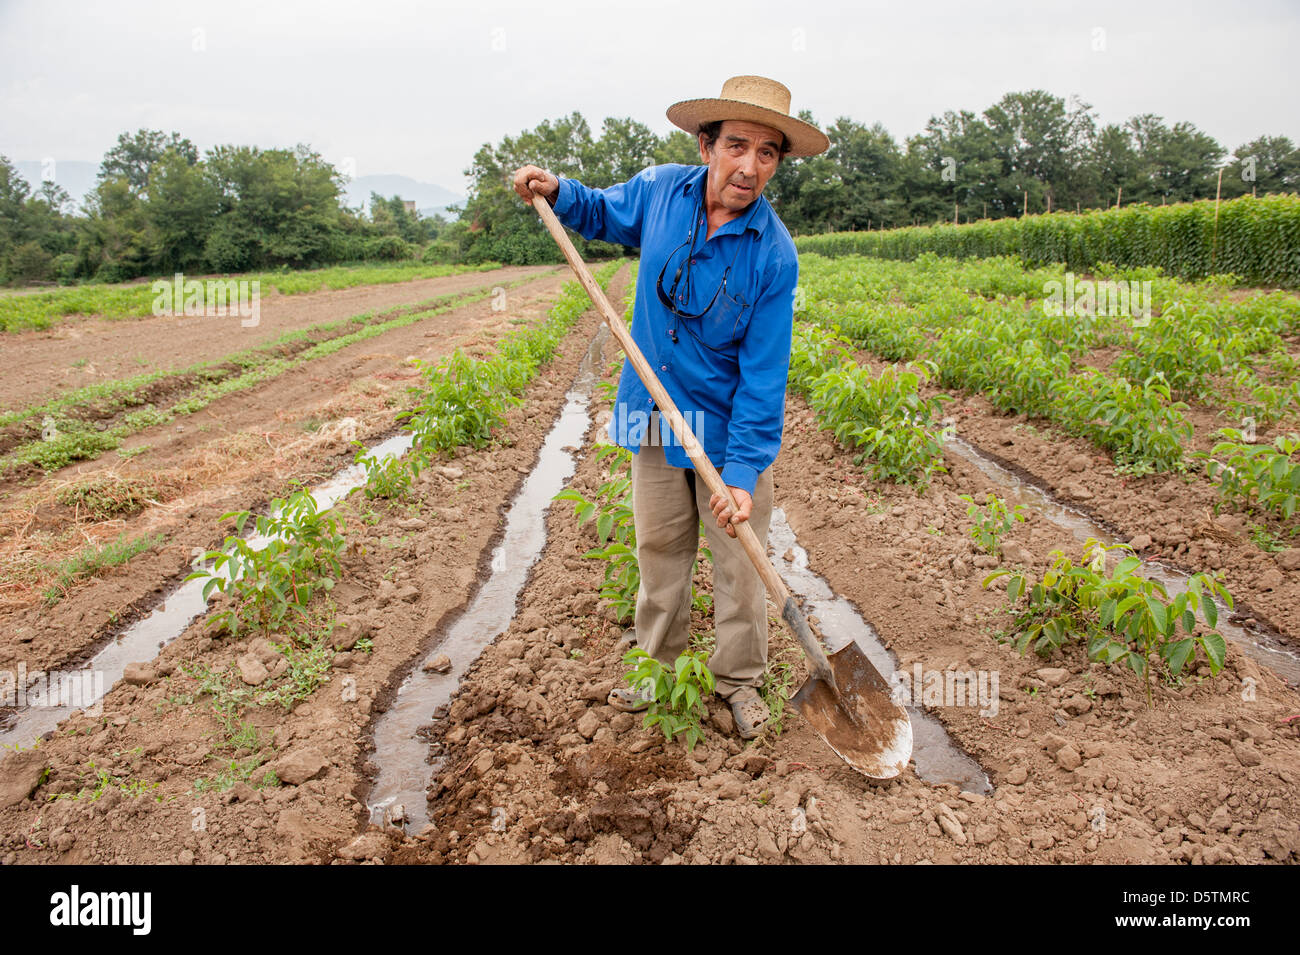 Farm worker tending flood irrigation on a fruit tree nursery in Chile, South America  Stock Photo